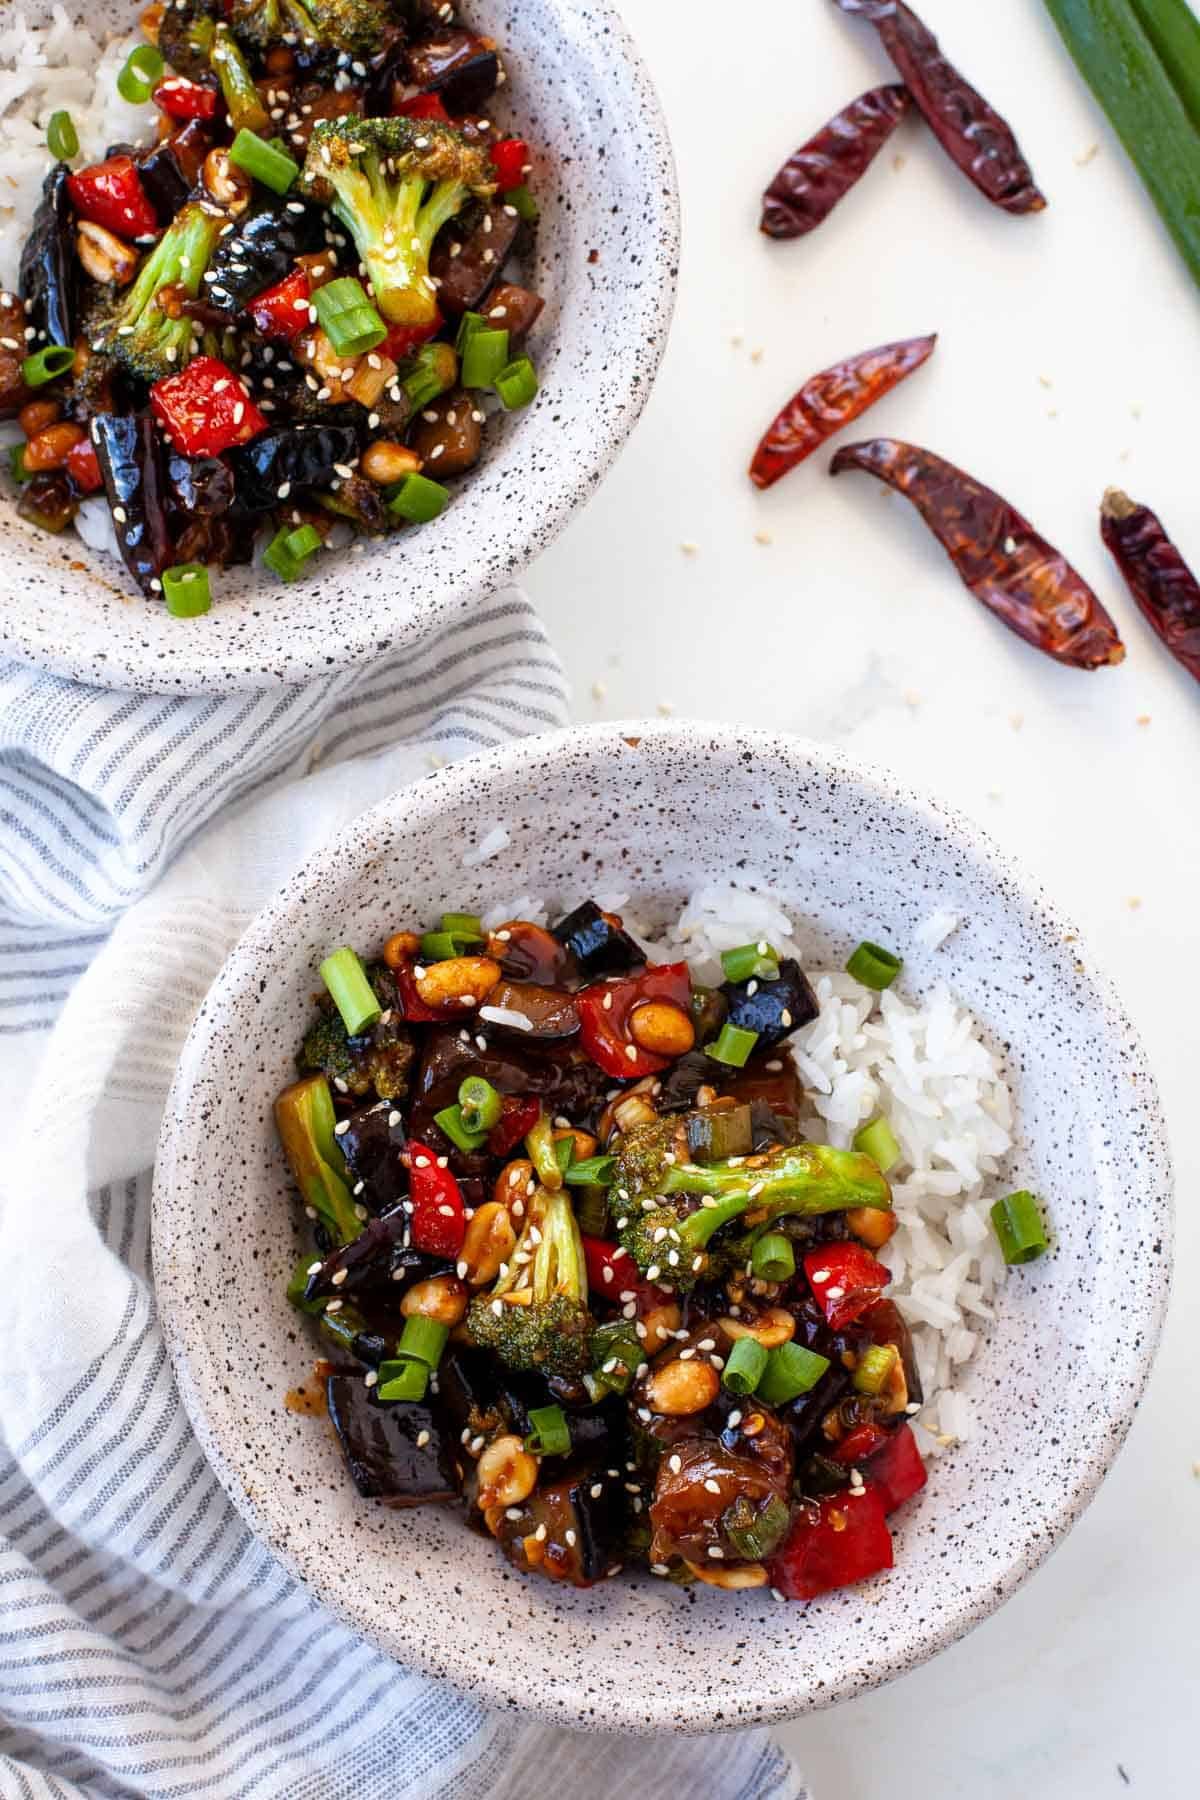 kung pao vegetables